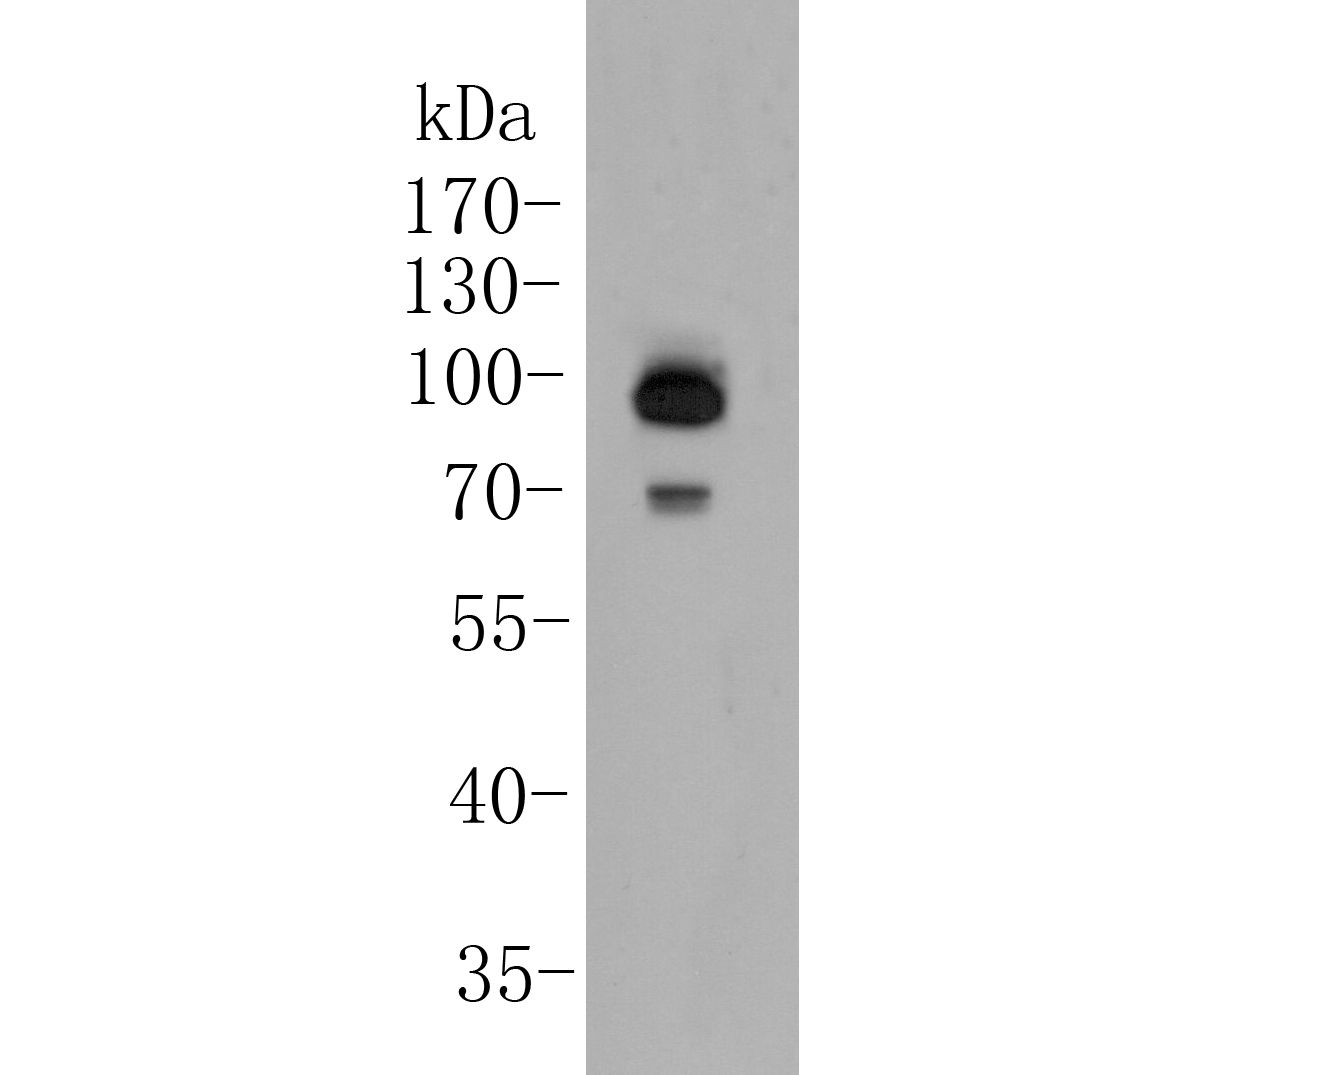 Western blot analysis of delta 1 Catenin/CAS on HUVEC cell lysate. Proteins were transferred to a PVDF membrane and blocked with 5% BSA in PBS for 1 hour at room temperature. The primary antibody (ER1901-92, 1/1000) was used in 5% BSA at room temperature for 2 hours. Goat Anti-Rabbit IgG - HRP Secondary Antibody (HA1001) at 1:5,000 dilution was used for 1 hour at room temperature.